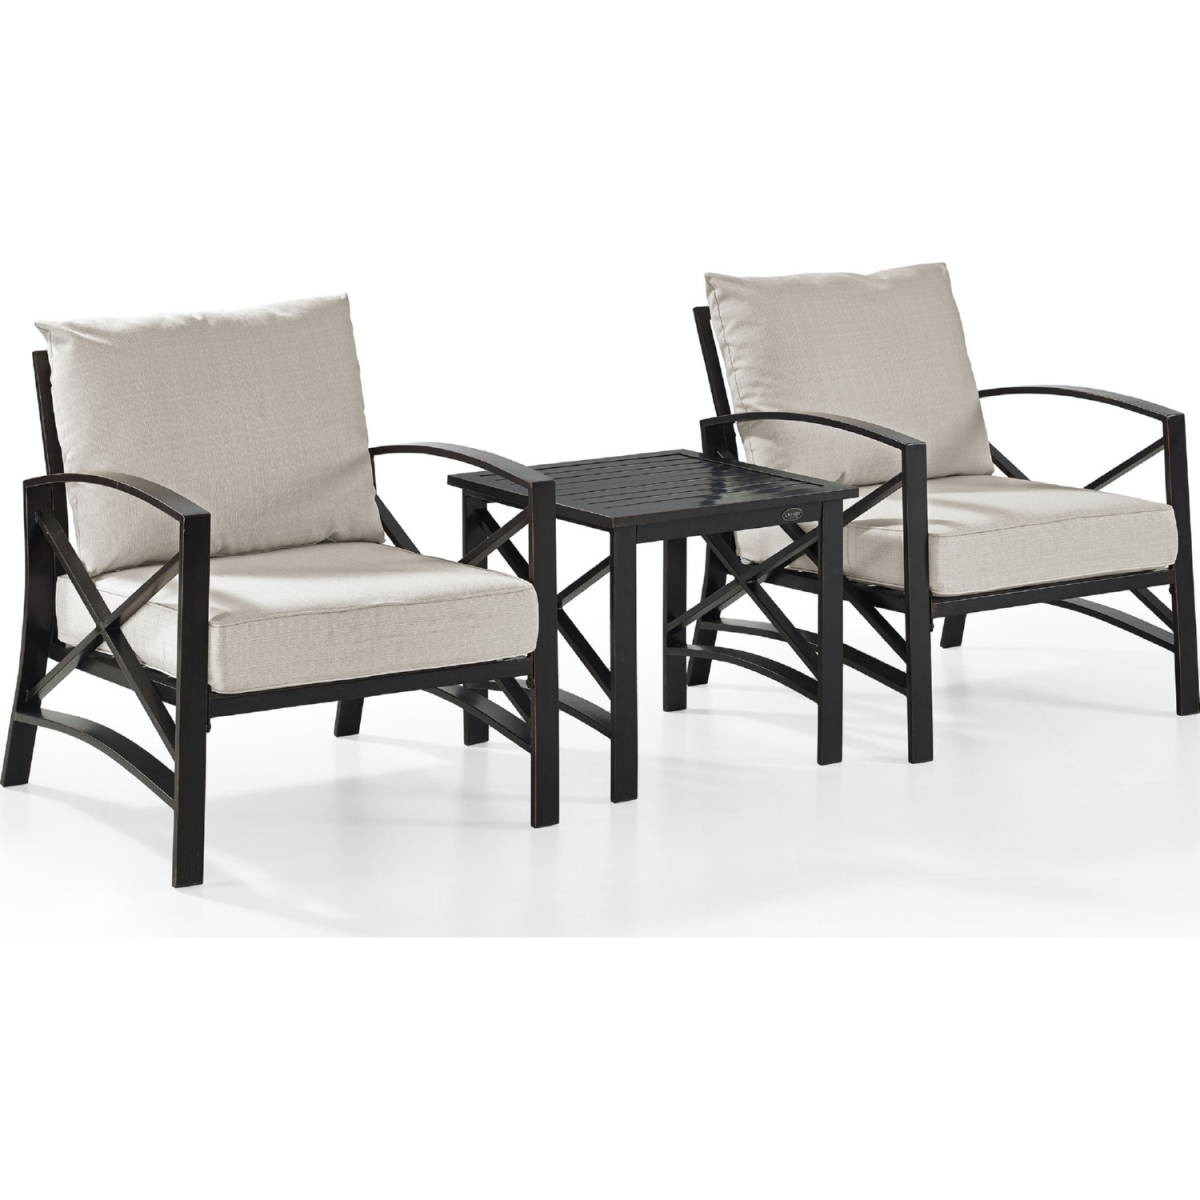 Ko60016bz-ol 3 Piece Kaplan Outdoor Seating Set With Oatmeal Cushion - Two Chairs, Side Table